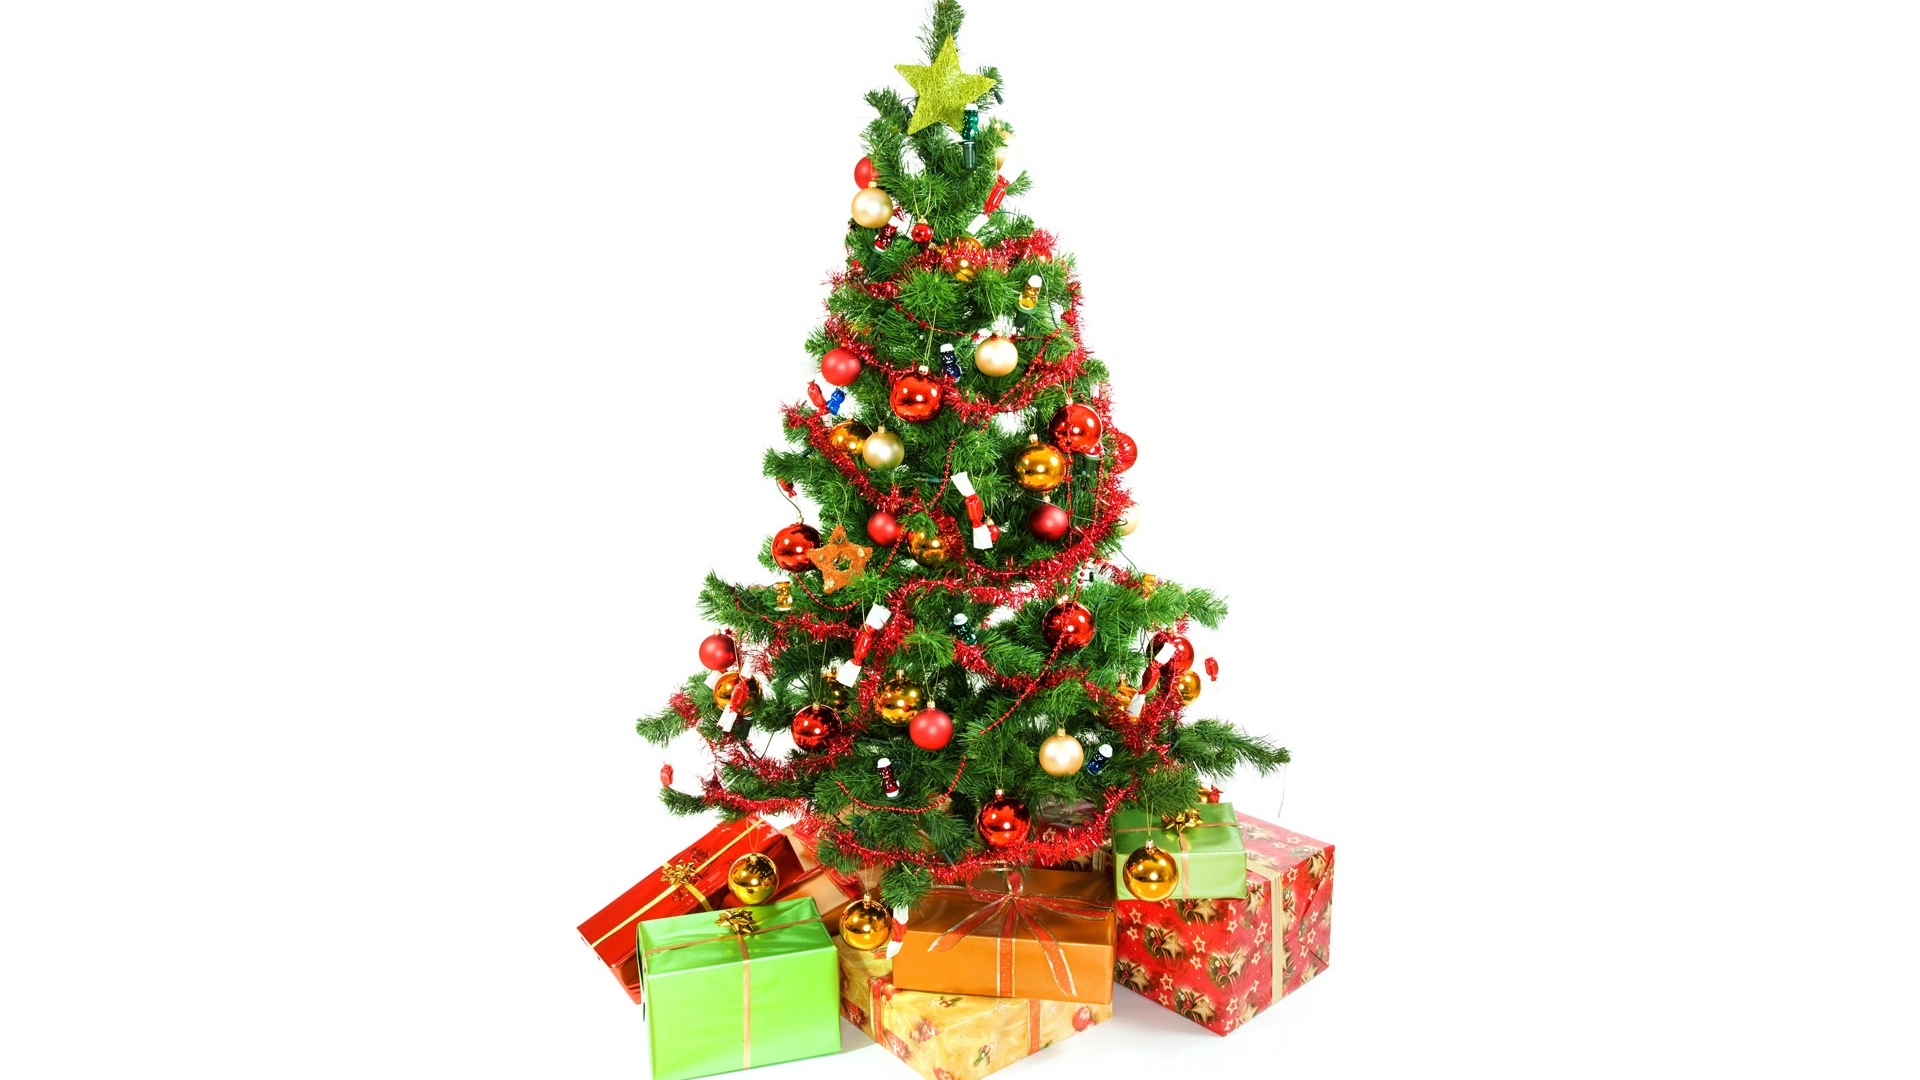 Christmas Tree HD Wallpapers | New HD Wallpapers Download